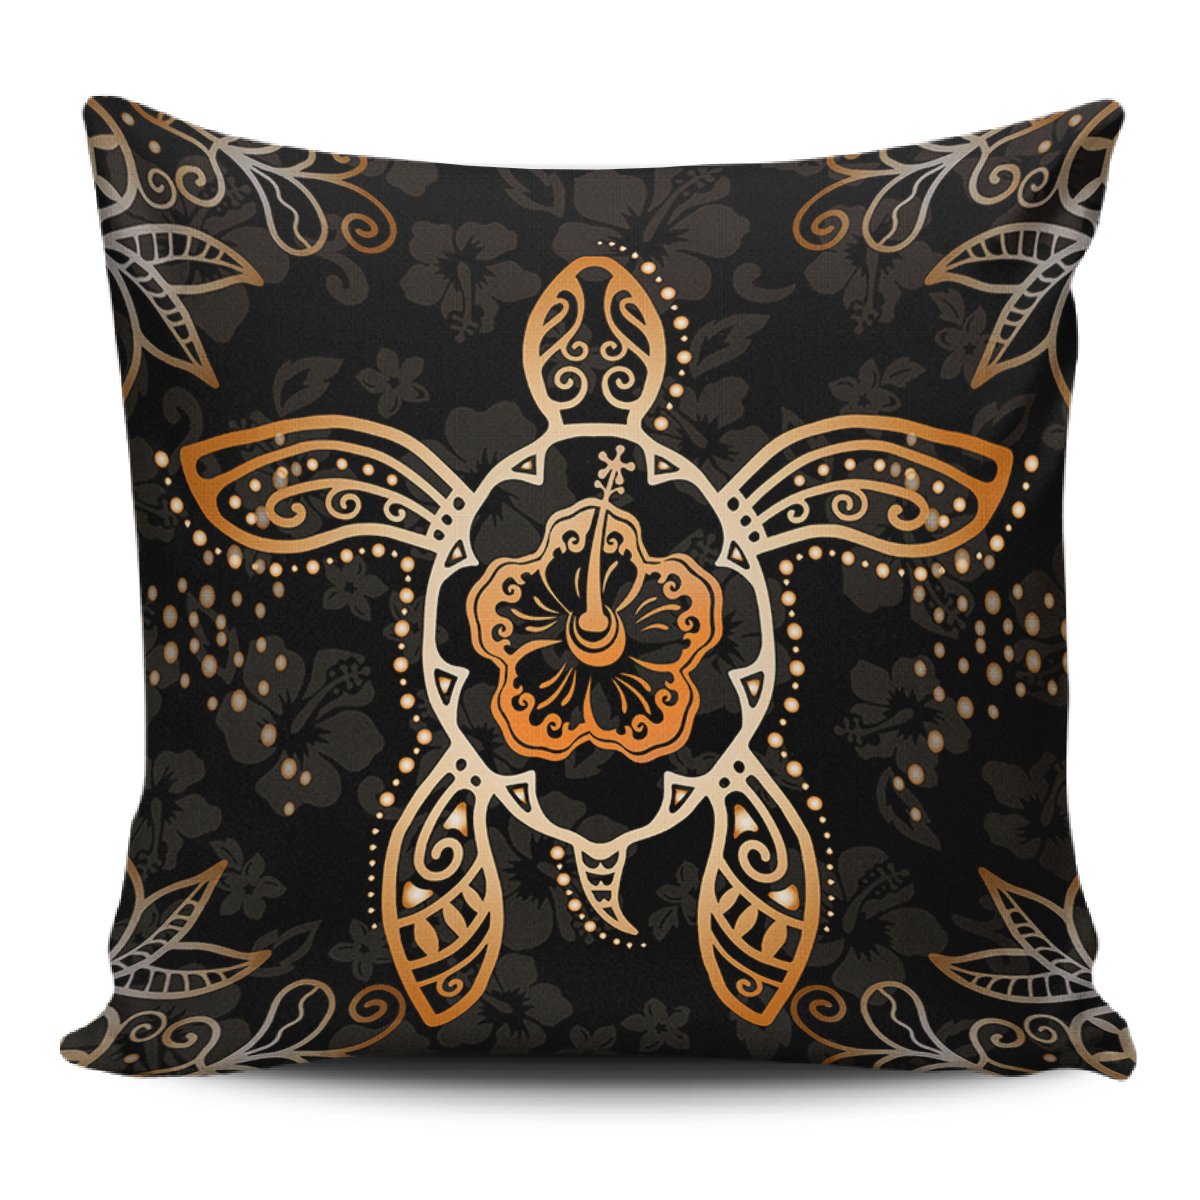 Turtle Hibiscus Orange Pillow Covers One Size Zippered Pillow Case 18"x18"(Twin Sides) Black - Polynesian Pride